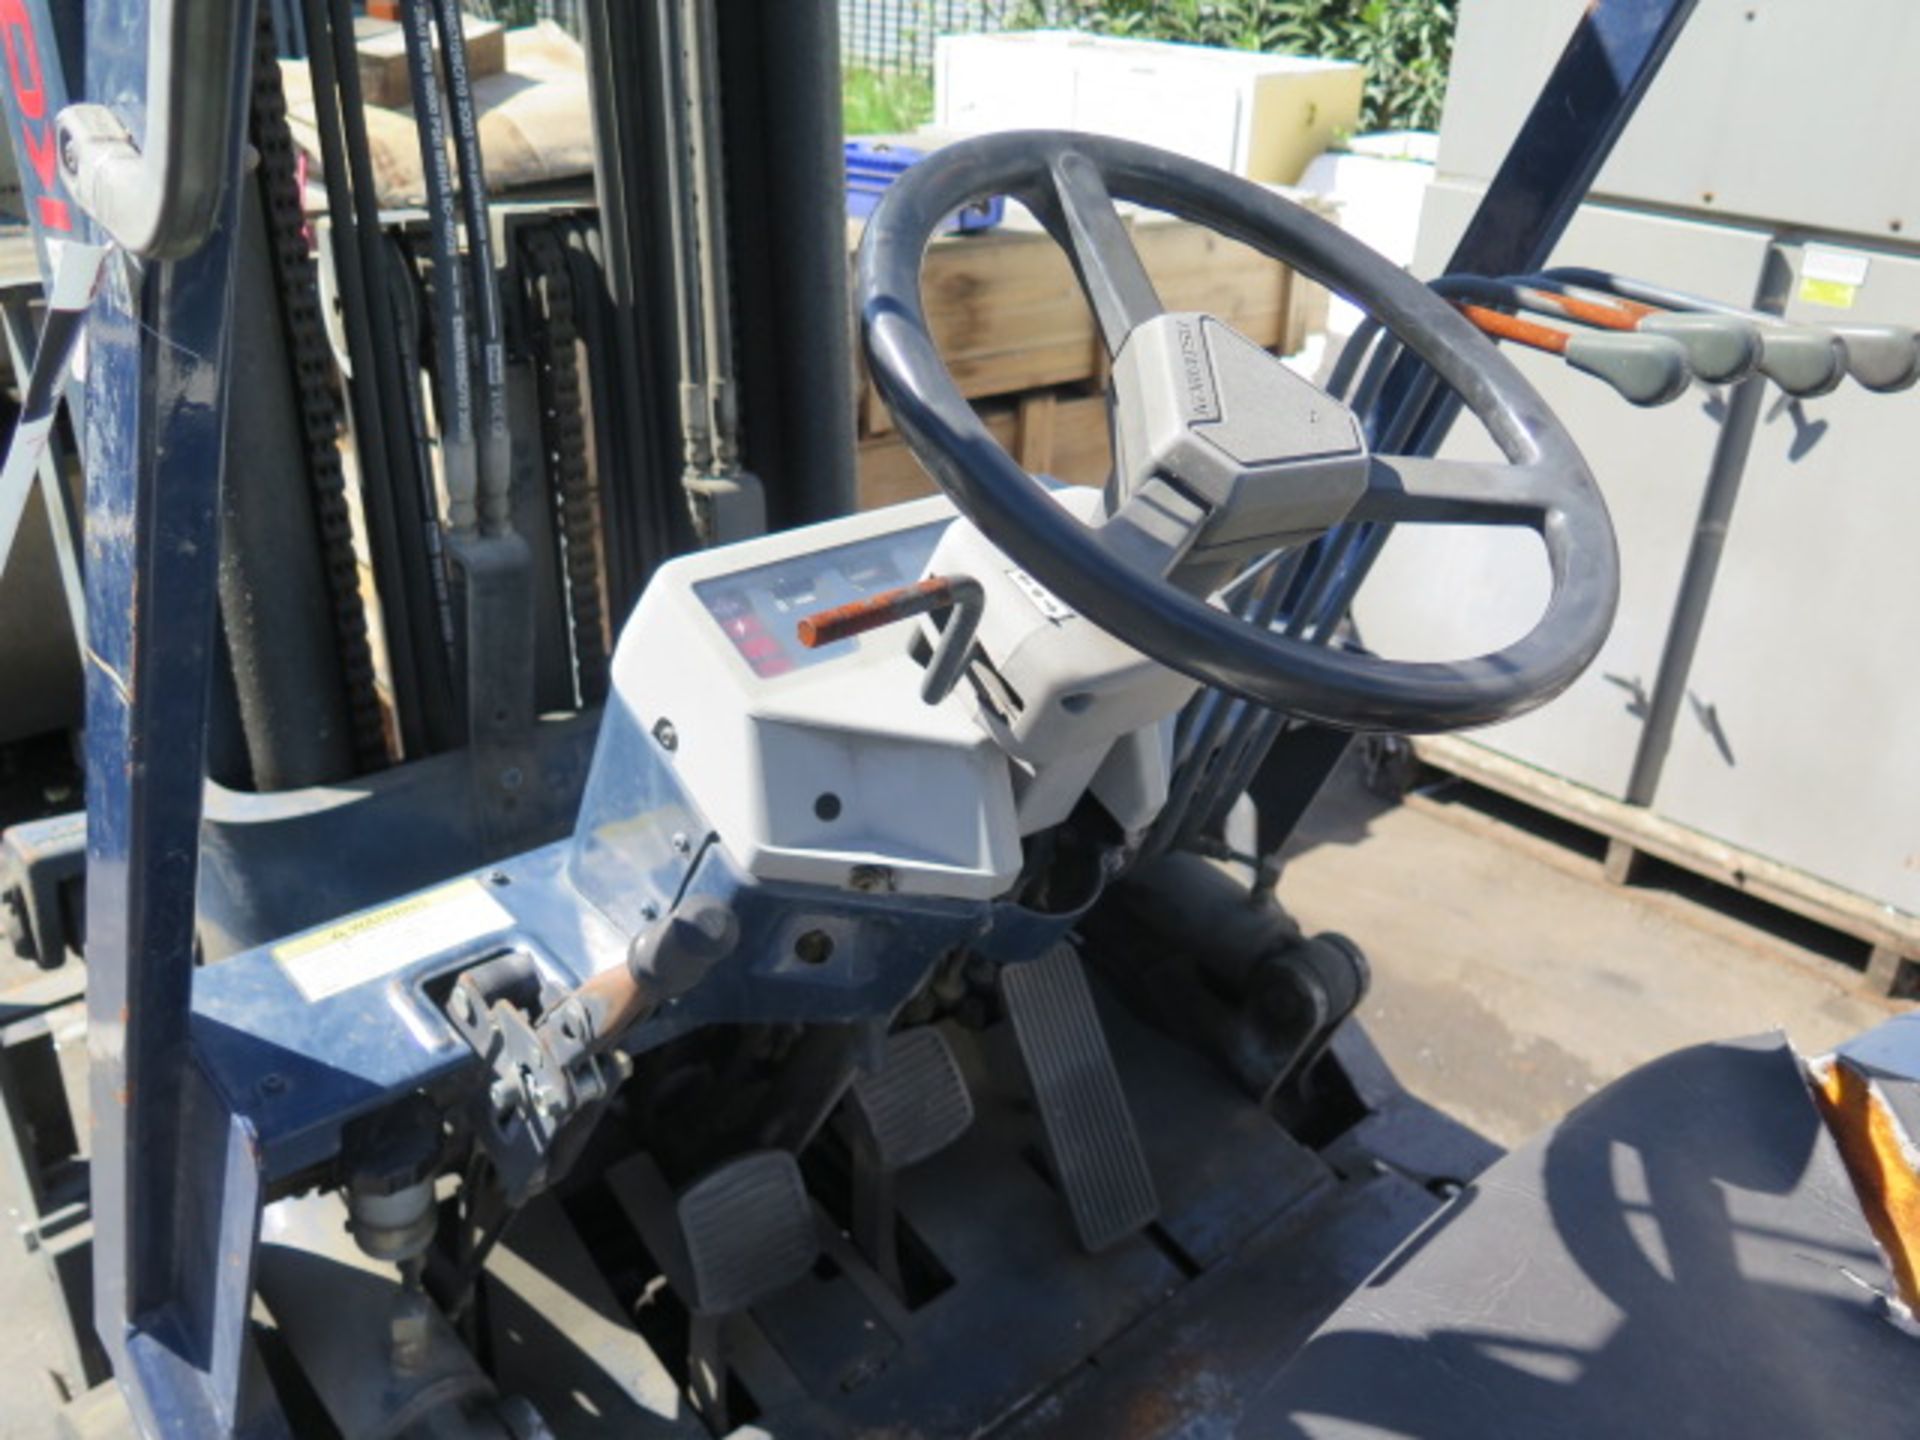 Komatsu 5000 Lb Cap LPG Forklift w/ 3-Stage Mast, Side Shift, 4th Actuator Lever, SOLD AS IS - Image 6 of 21